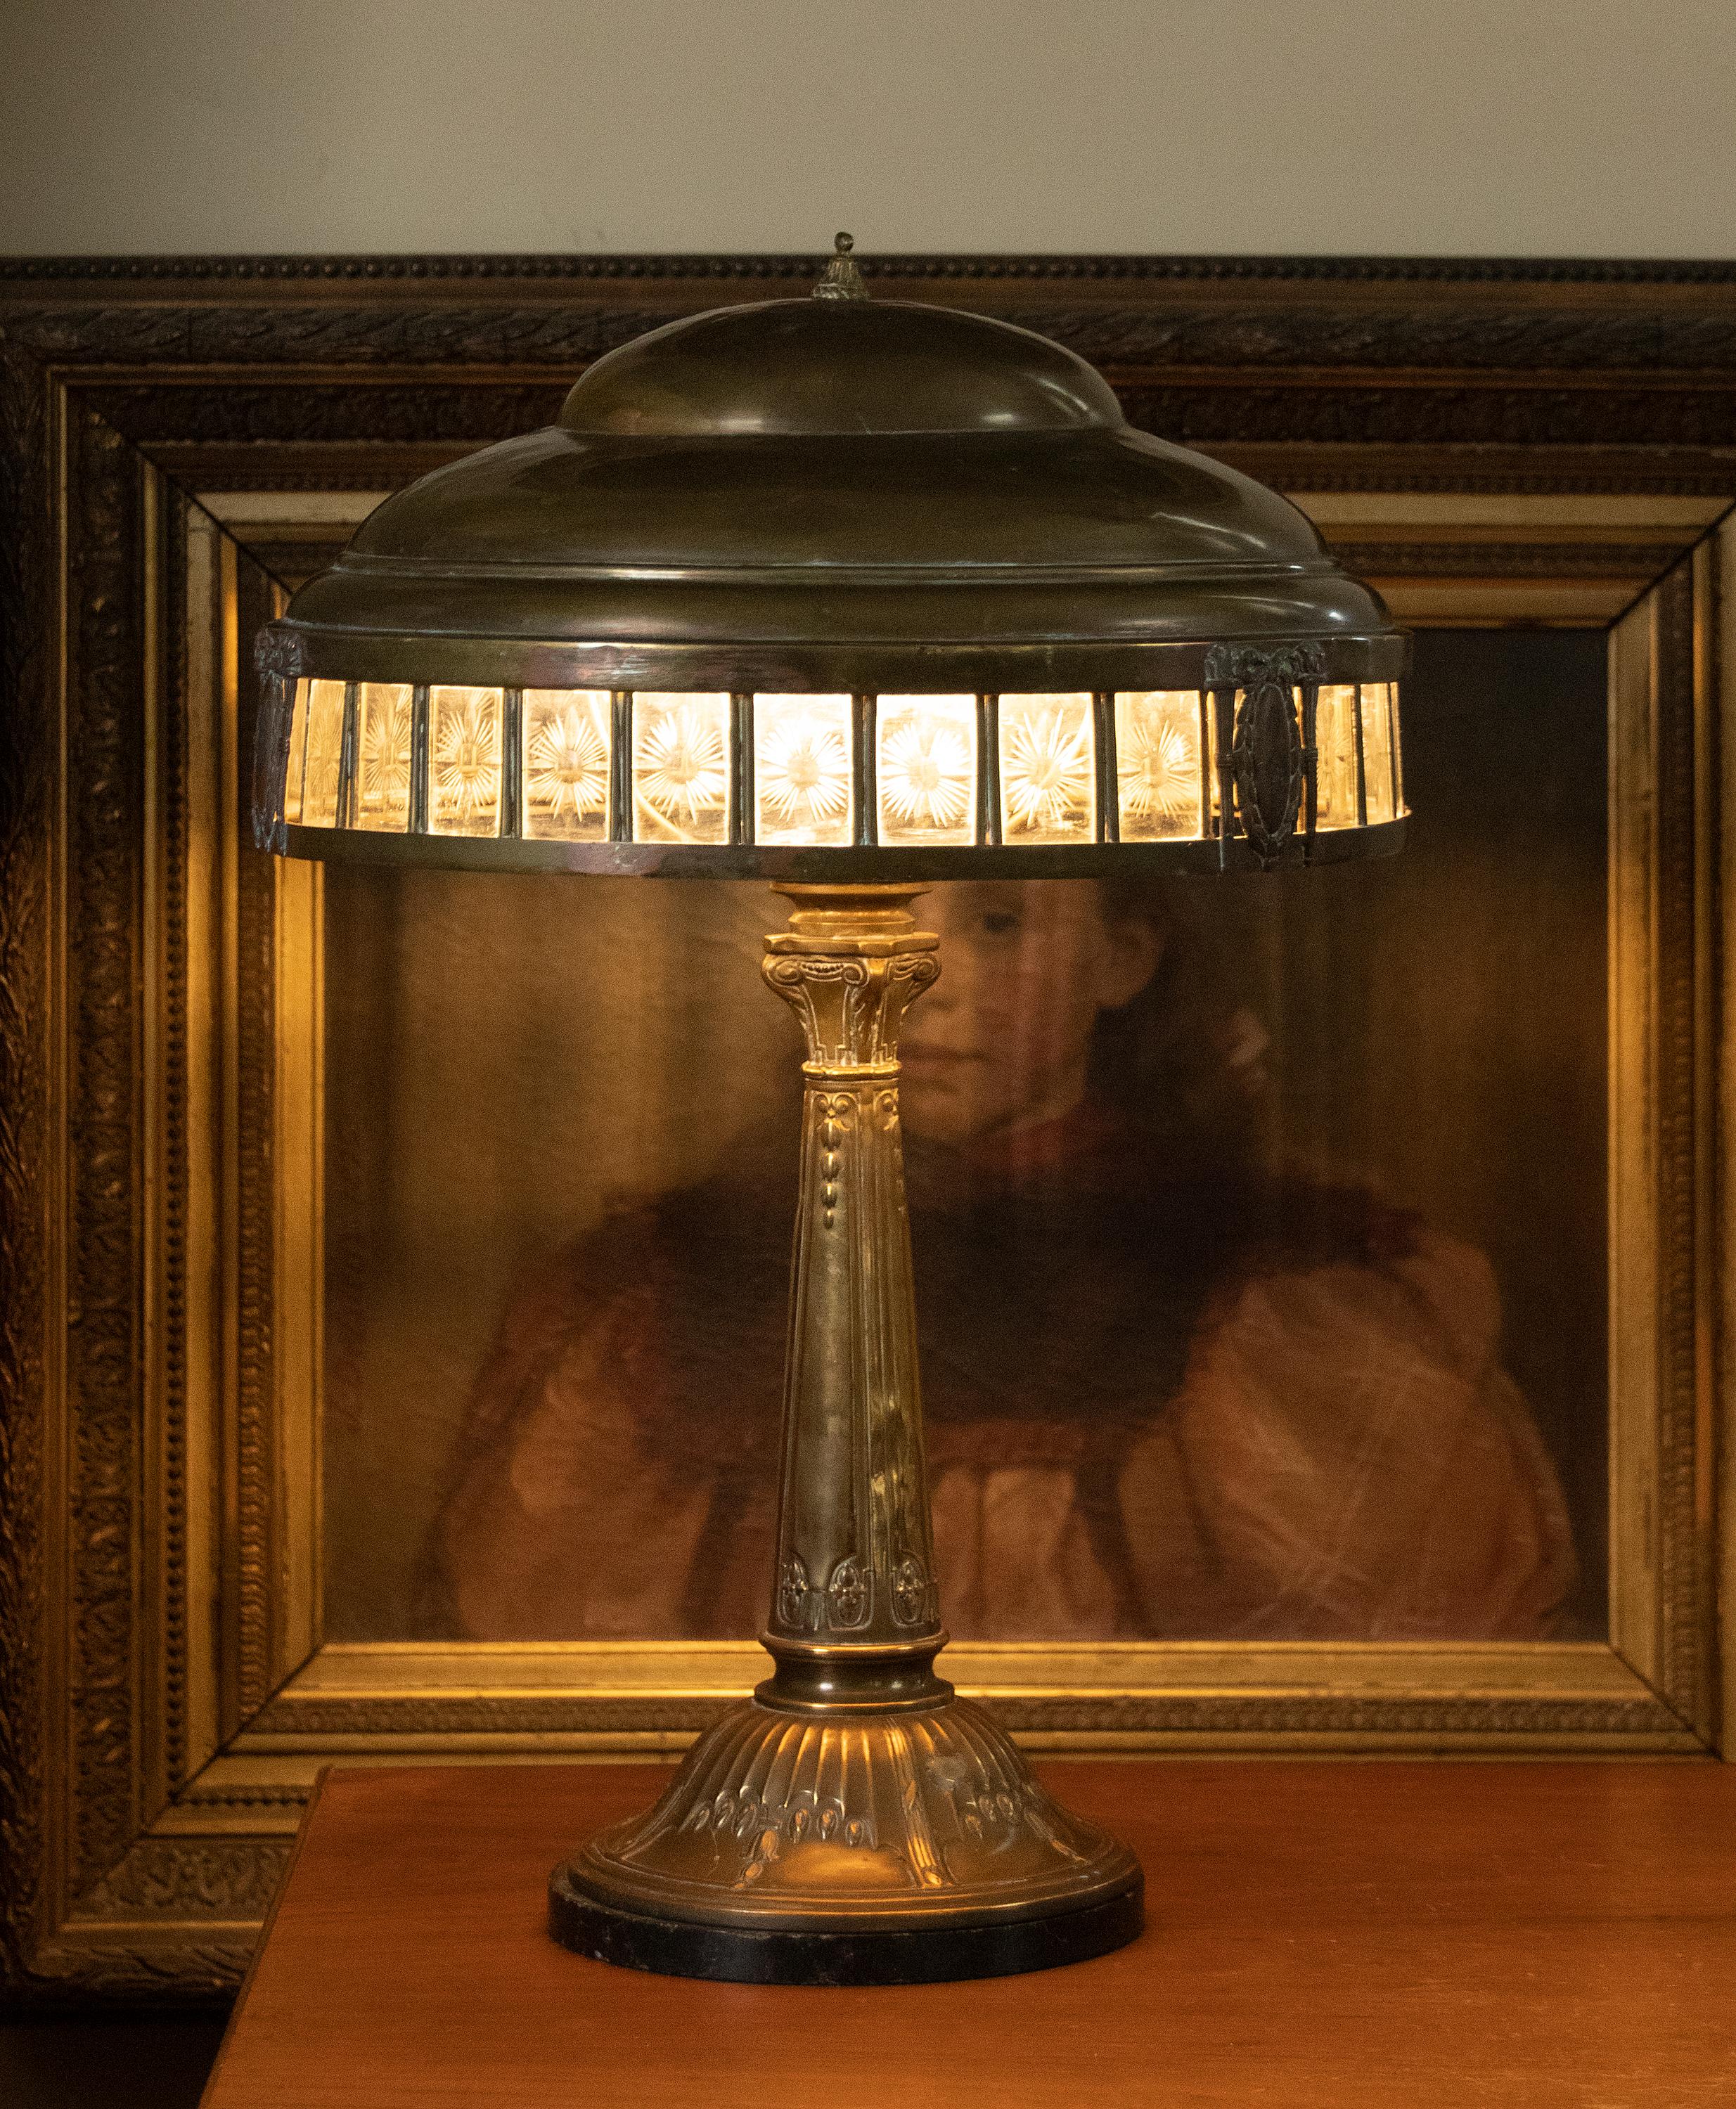 A brass table lamp from the French Art Deco period. The edge of the lampshade has cut glass, which gives a nice atmospheric effect when the lamp is swithed on. The shade rests on a brass base, with a black marble base underneath, so the lamp stands